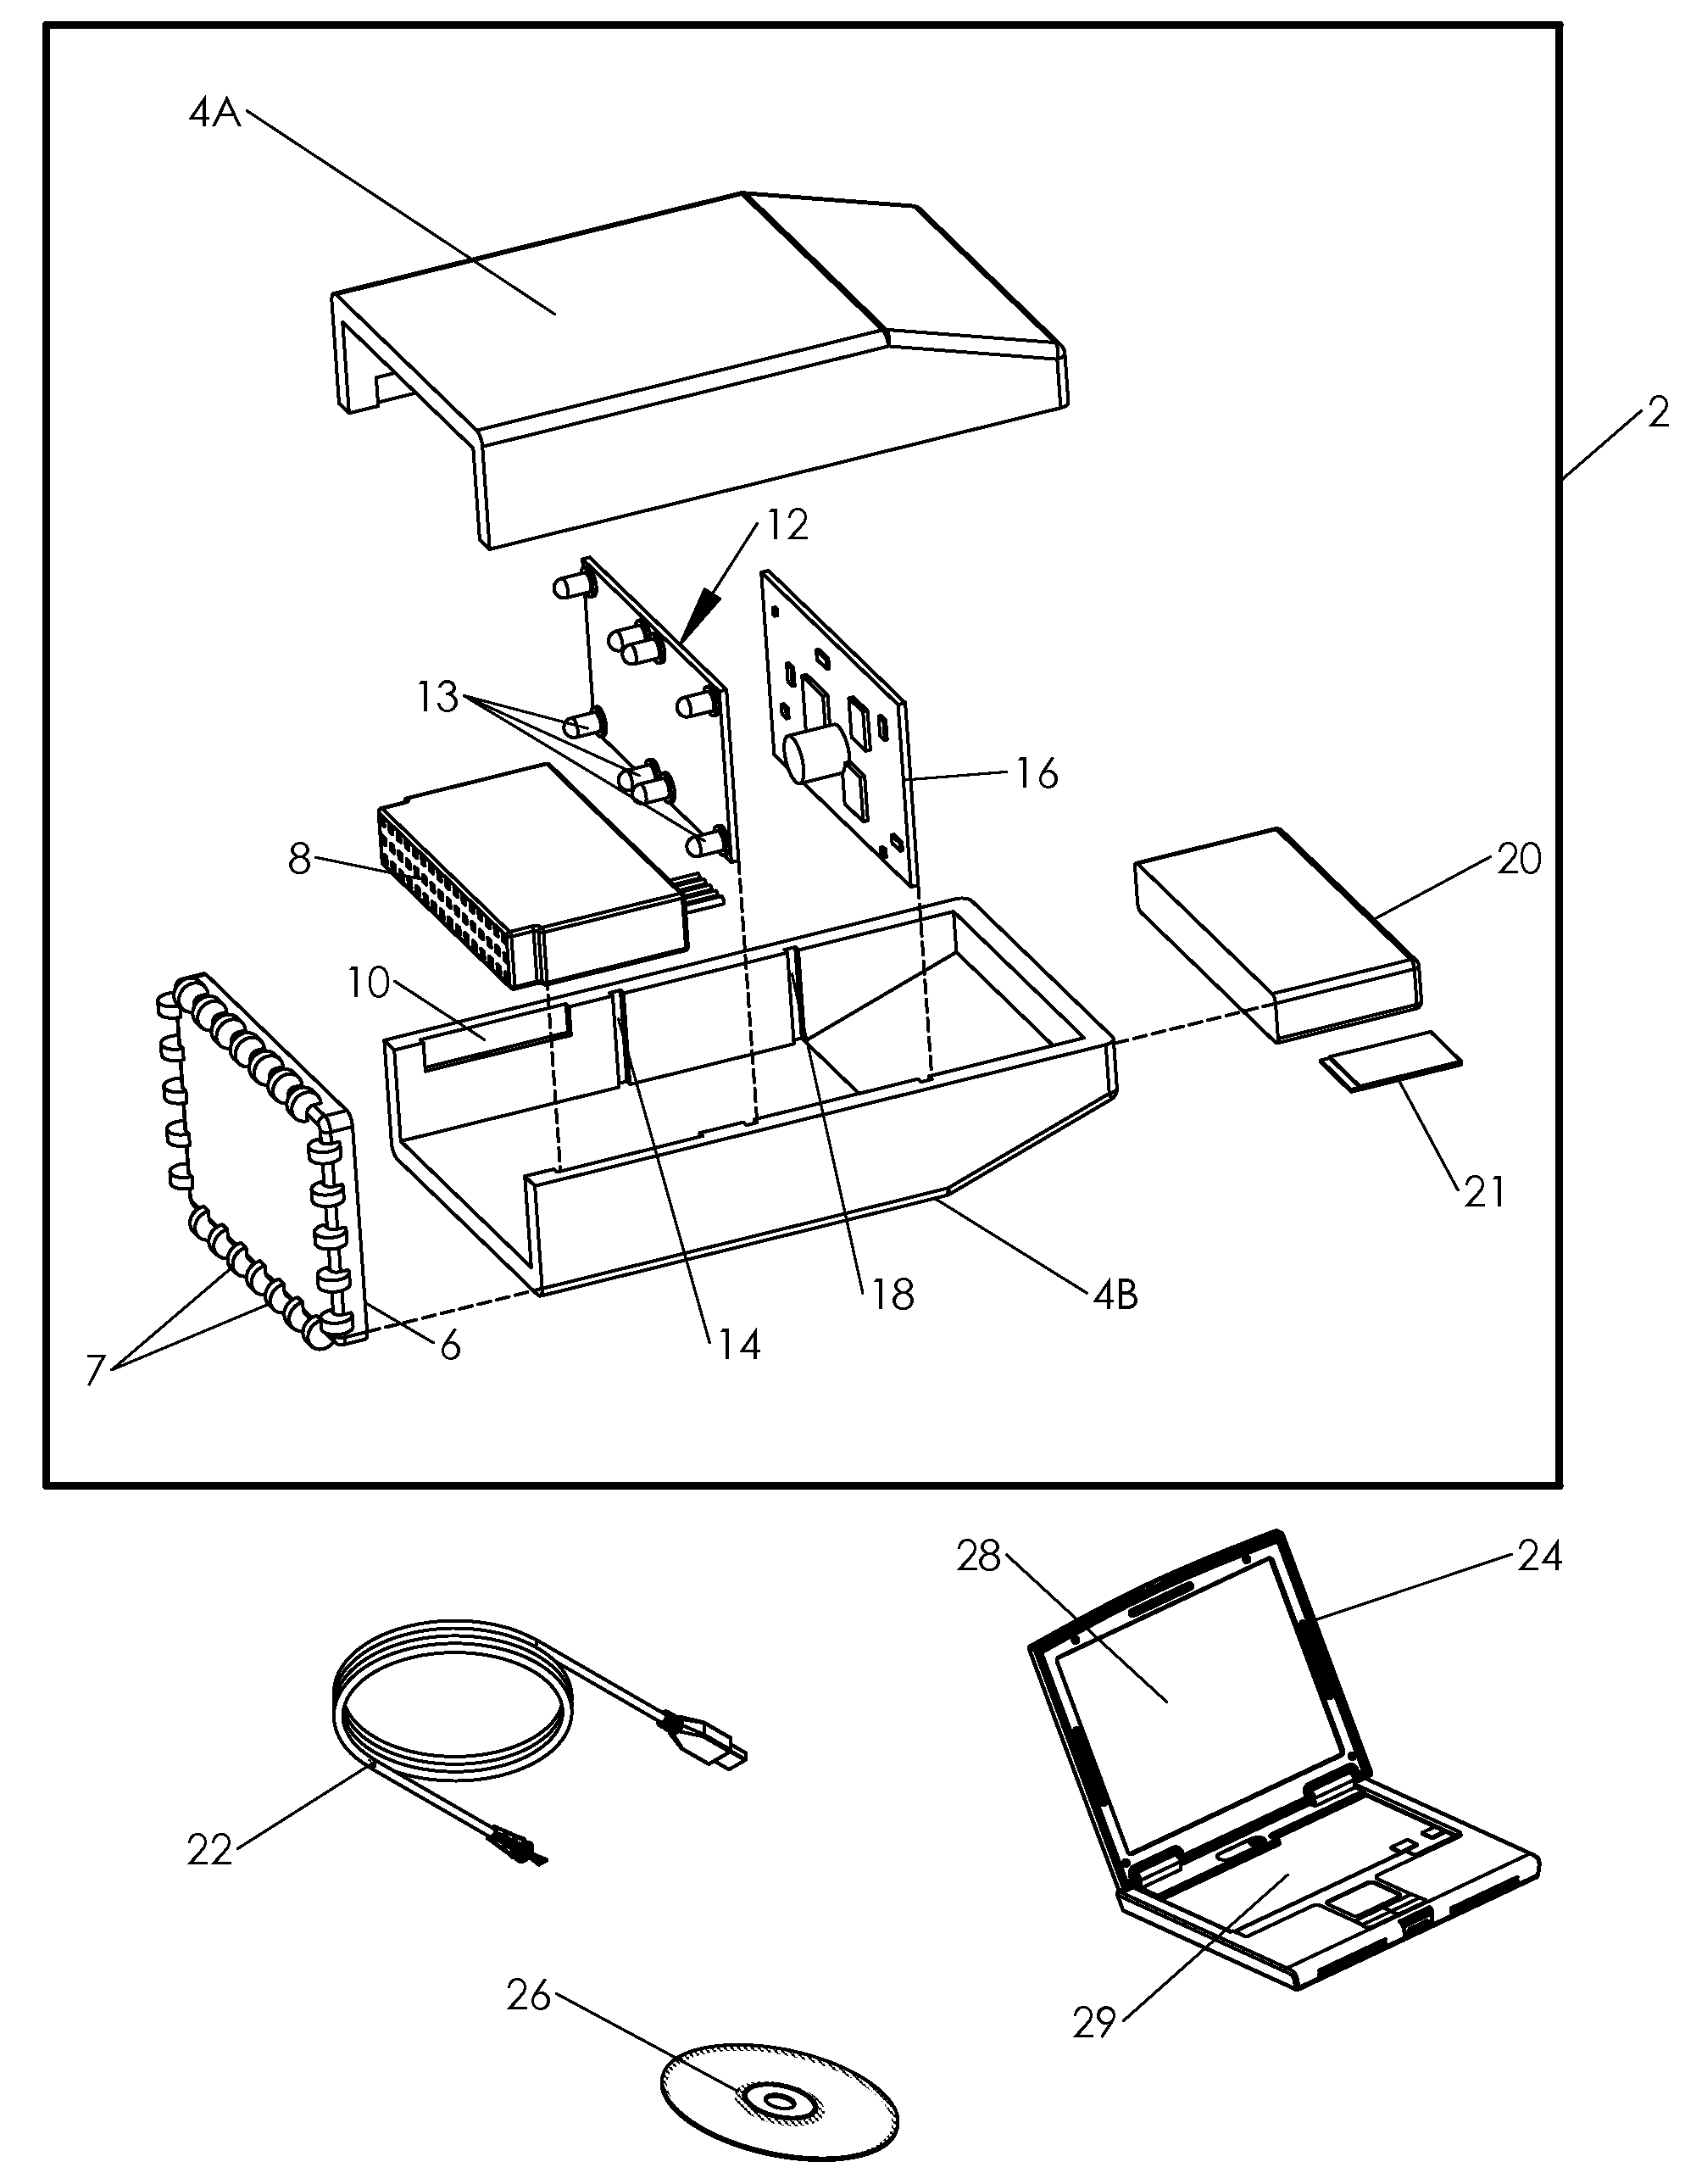 System and method for providing simulated images through cosmetic monitoring